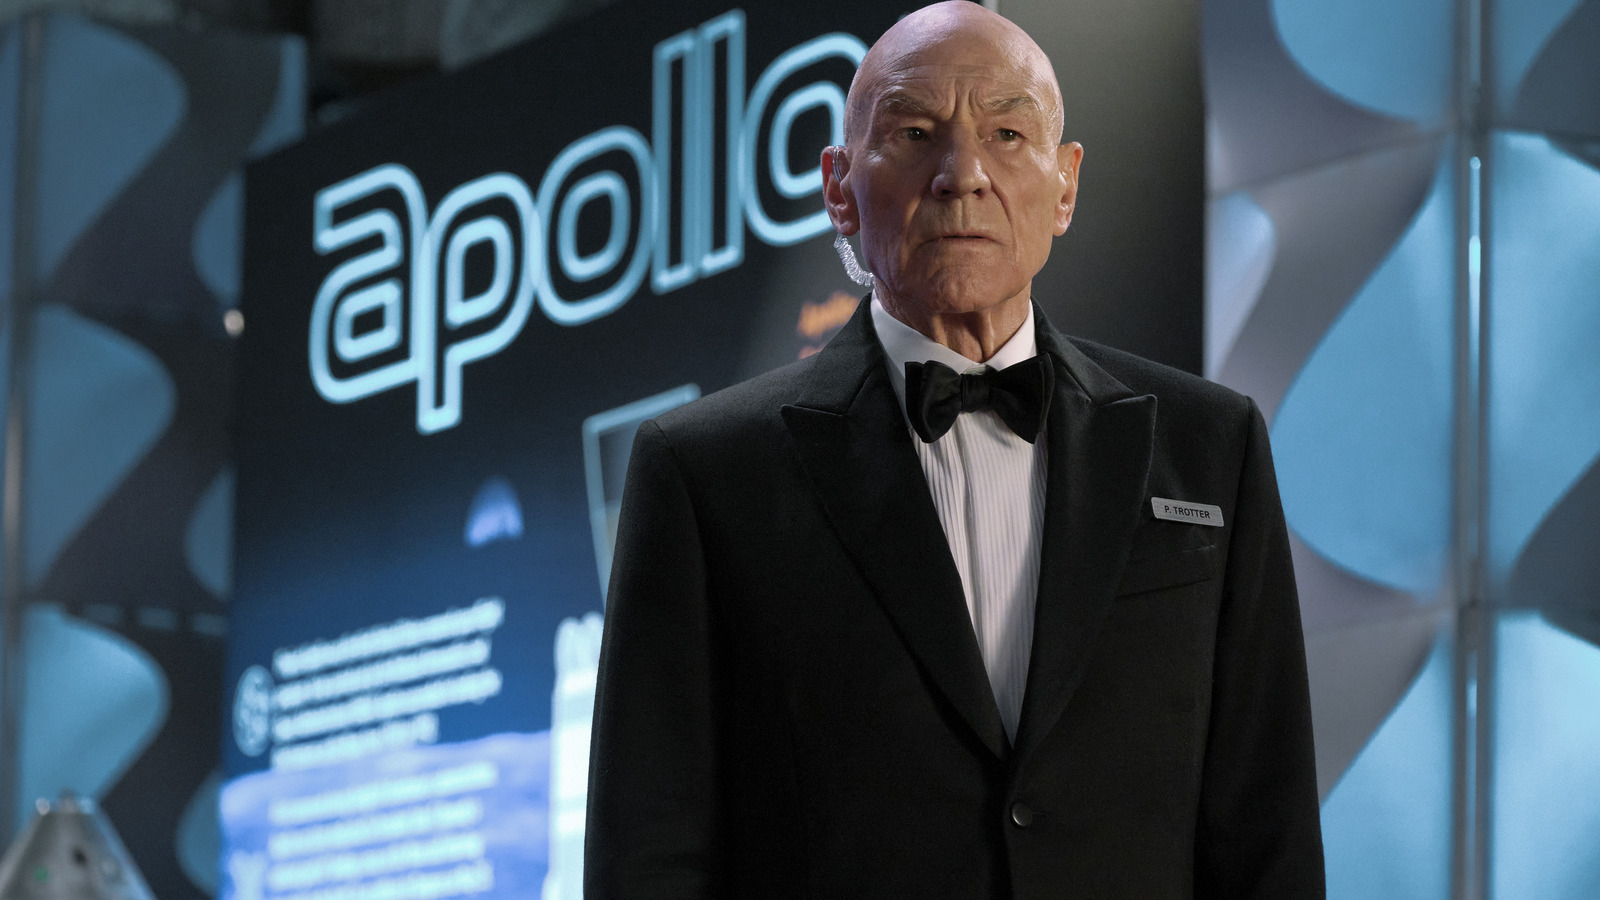 #A 30-Second Pep Talk Prevents Generations Of Fascism In Episode 6 Of Star Trek: Picard